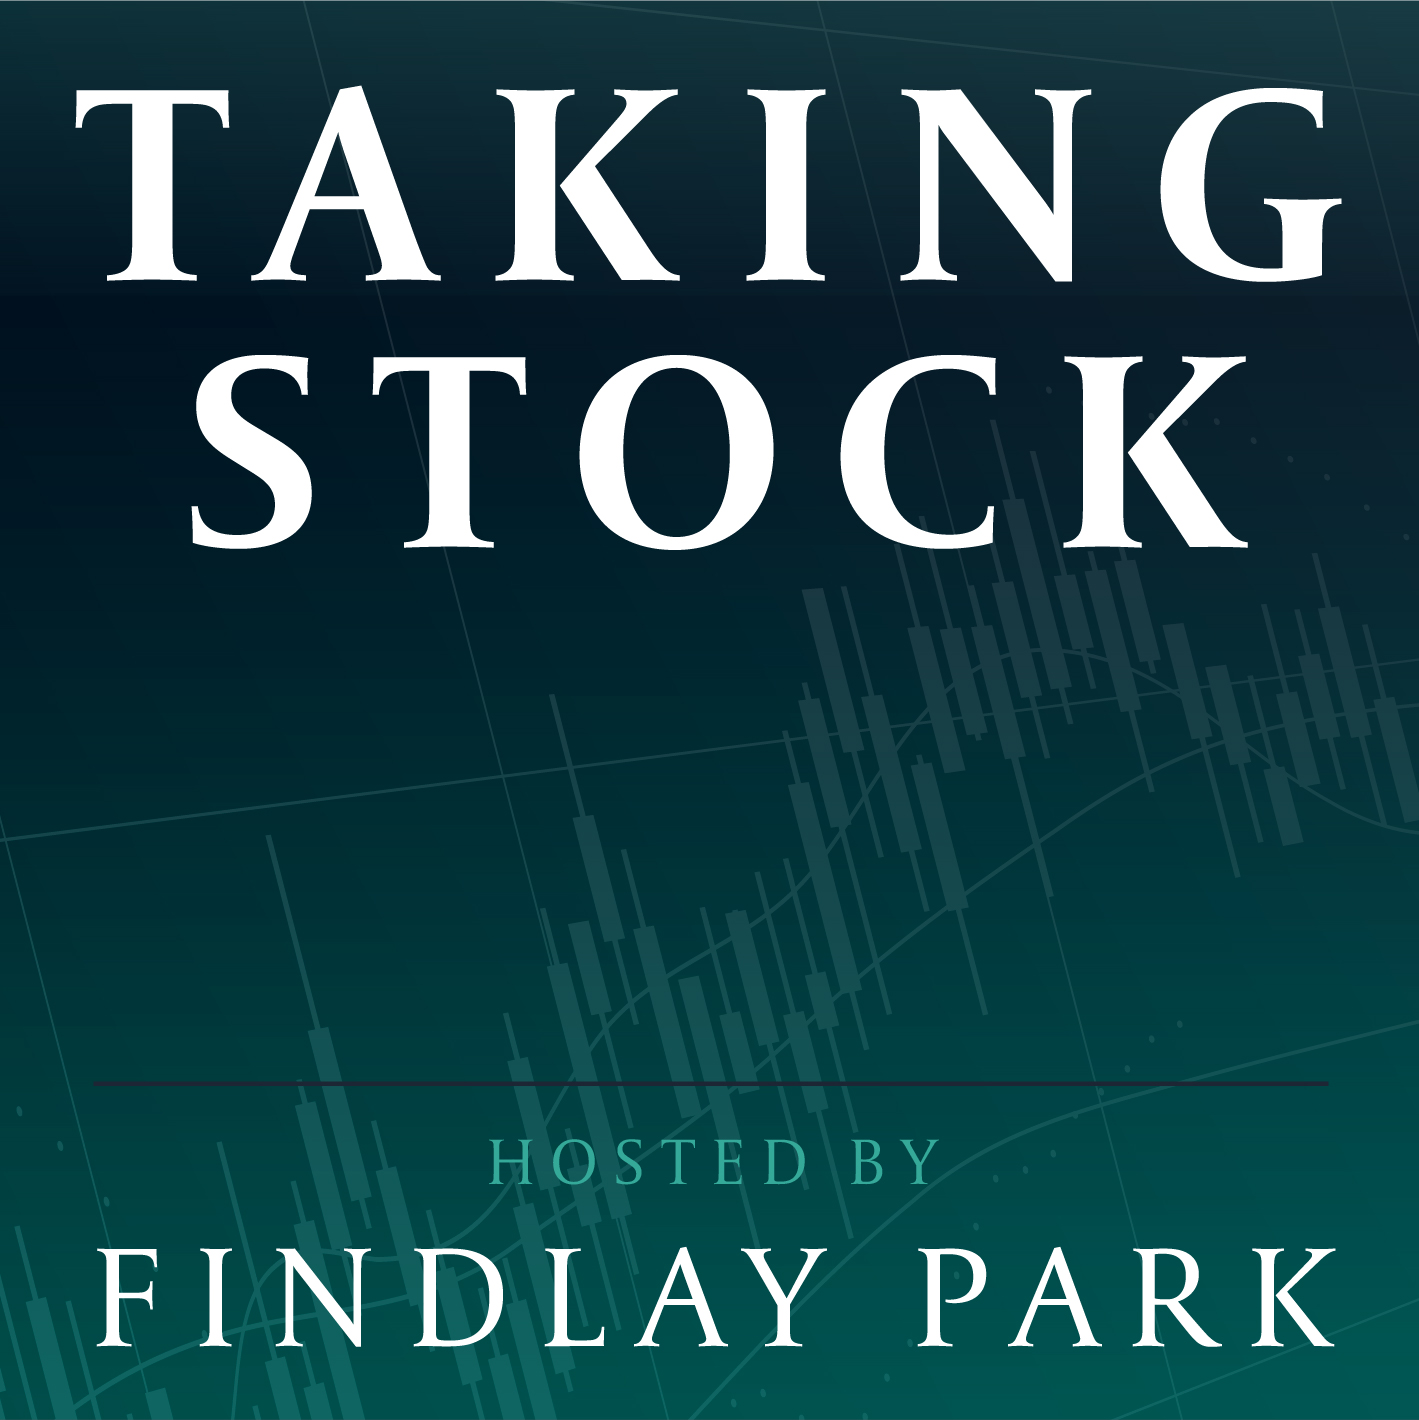 Taking Stock hosted by Findlay Park